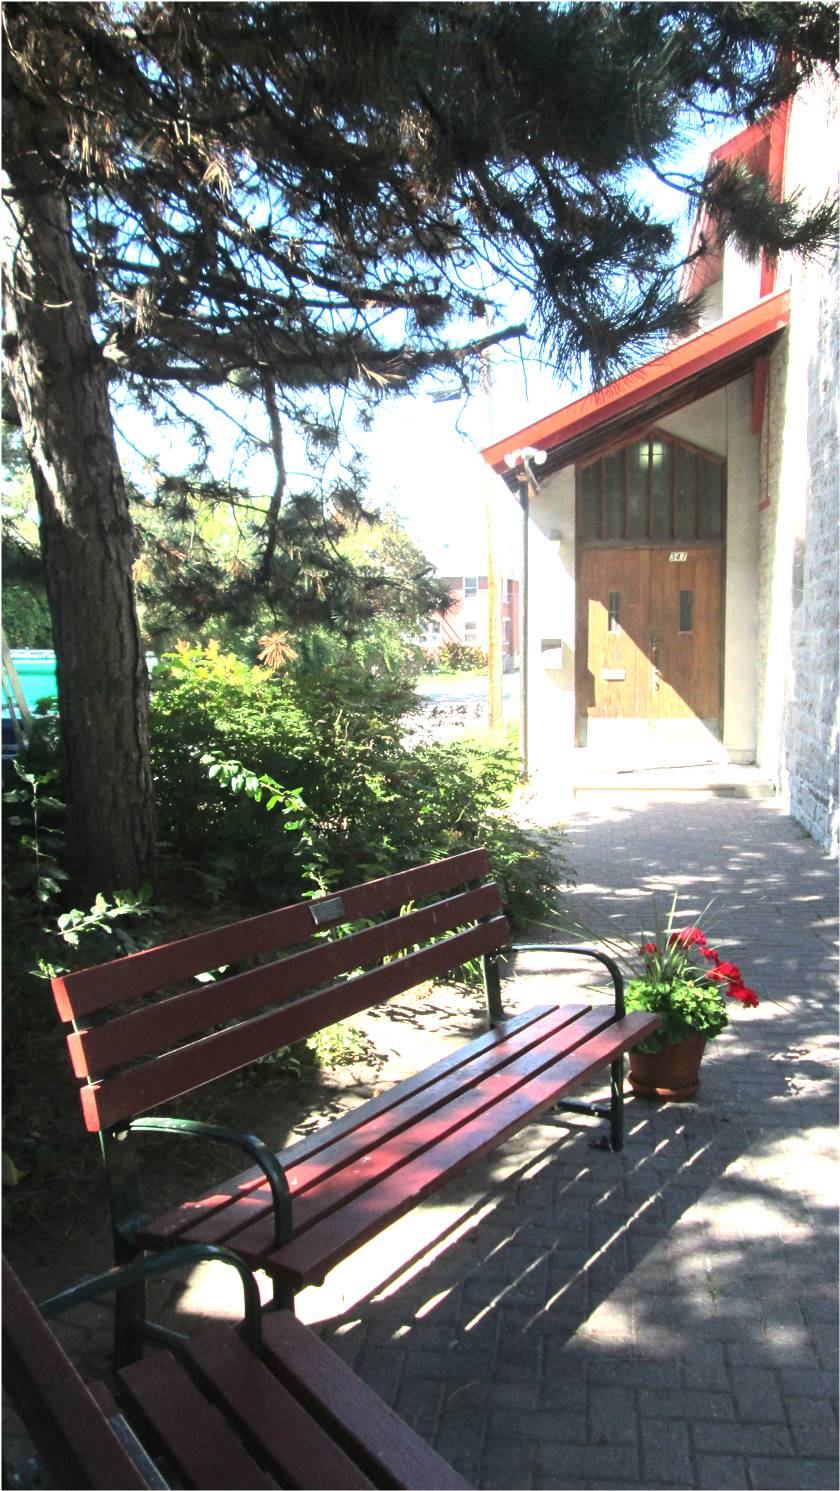 plaque and bench